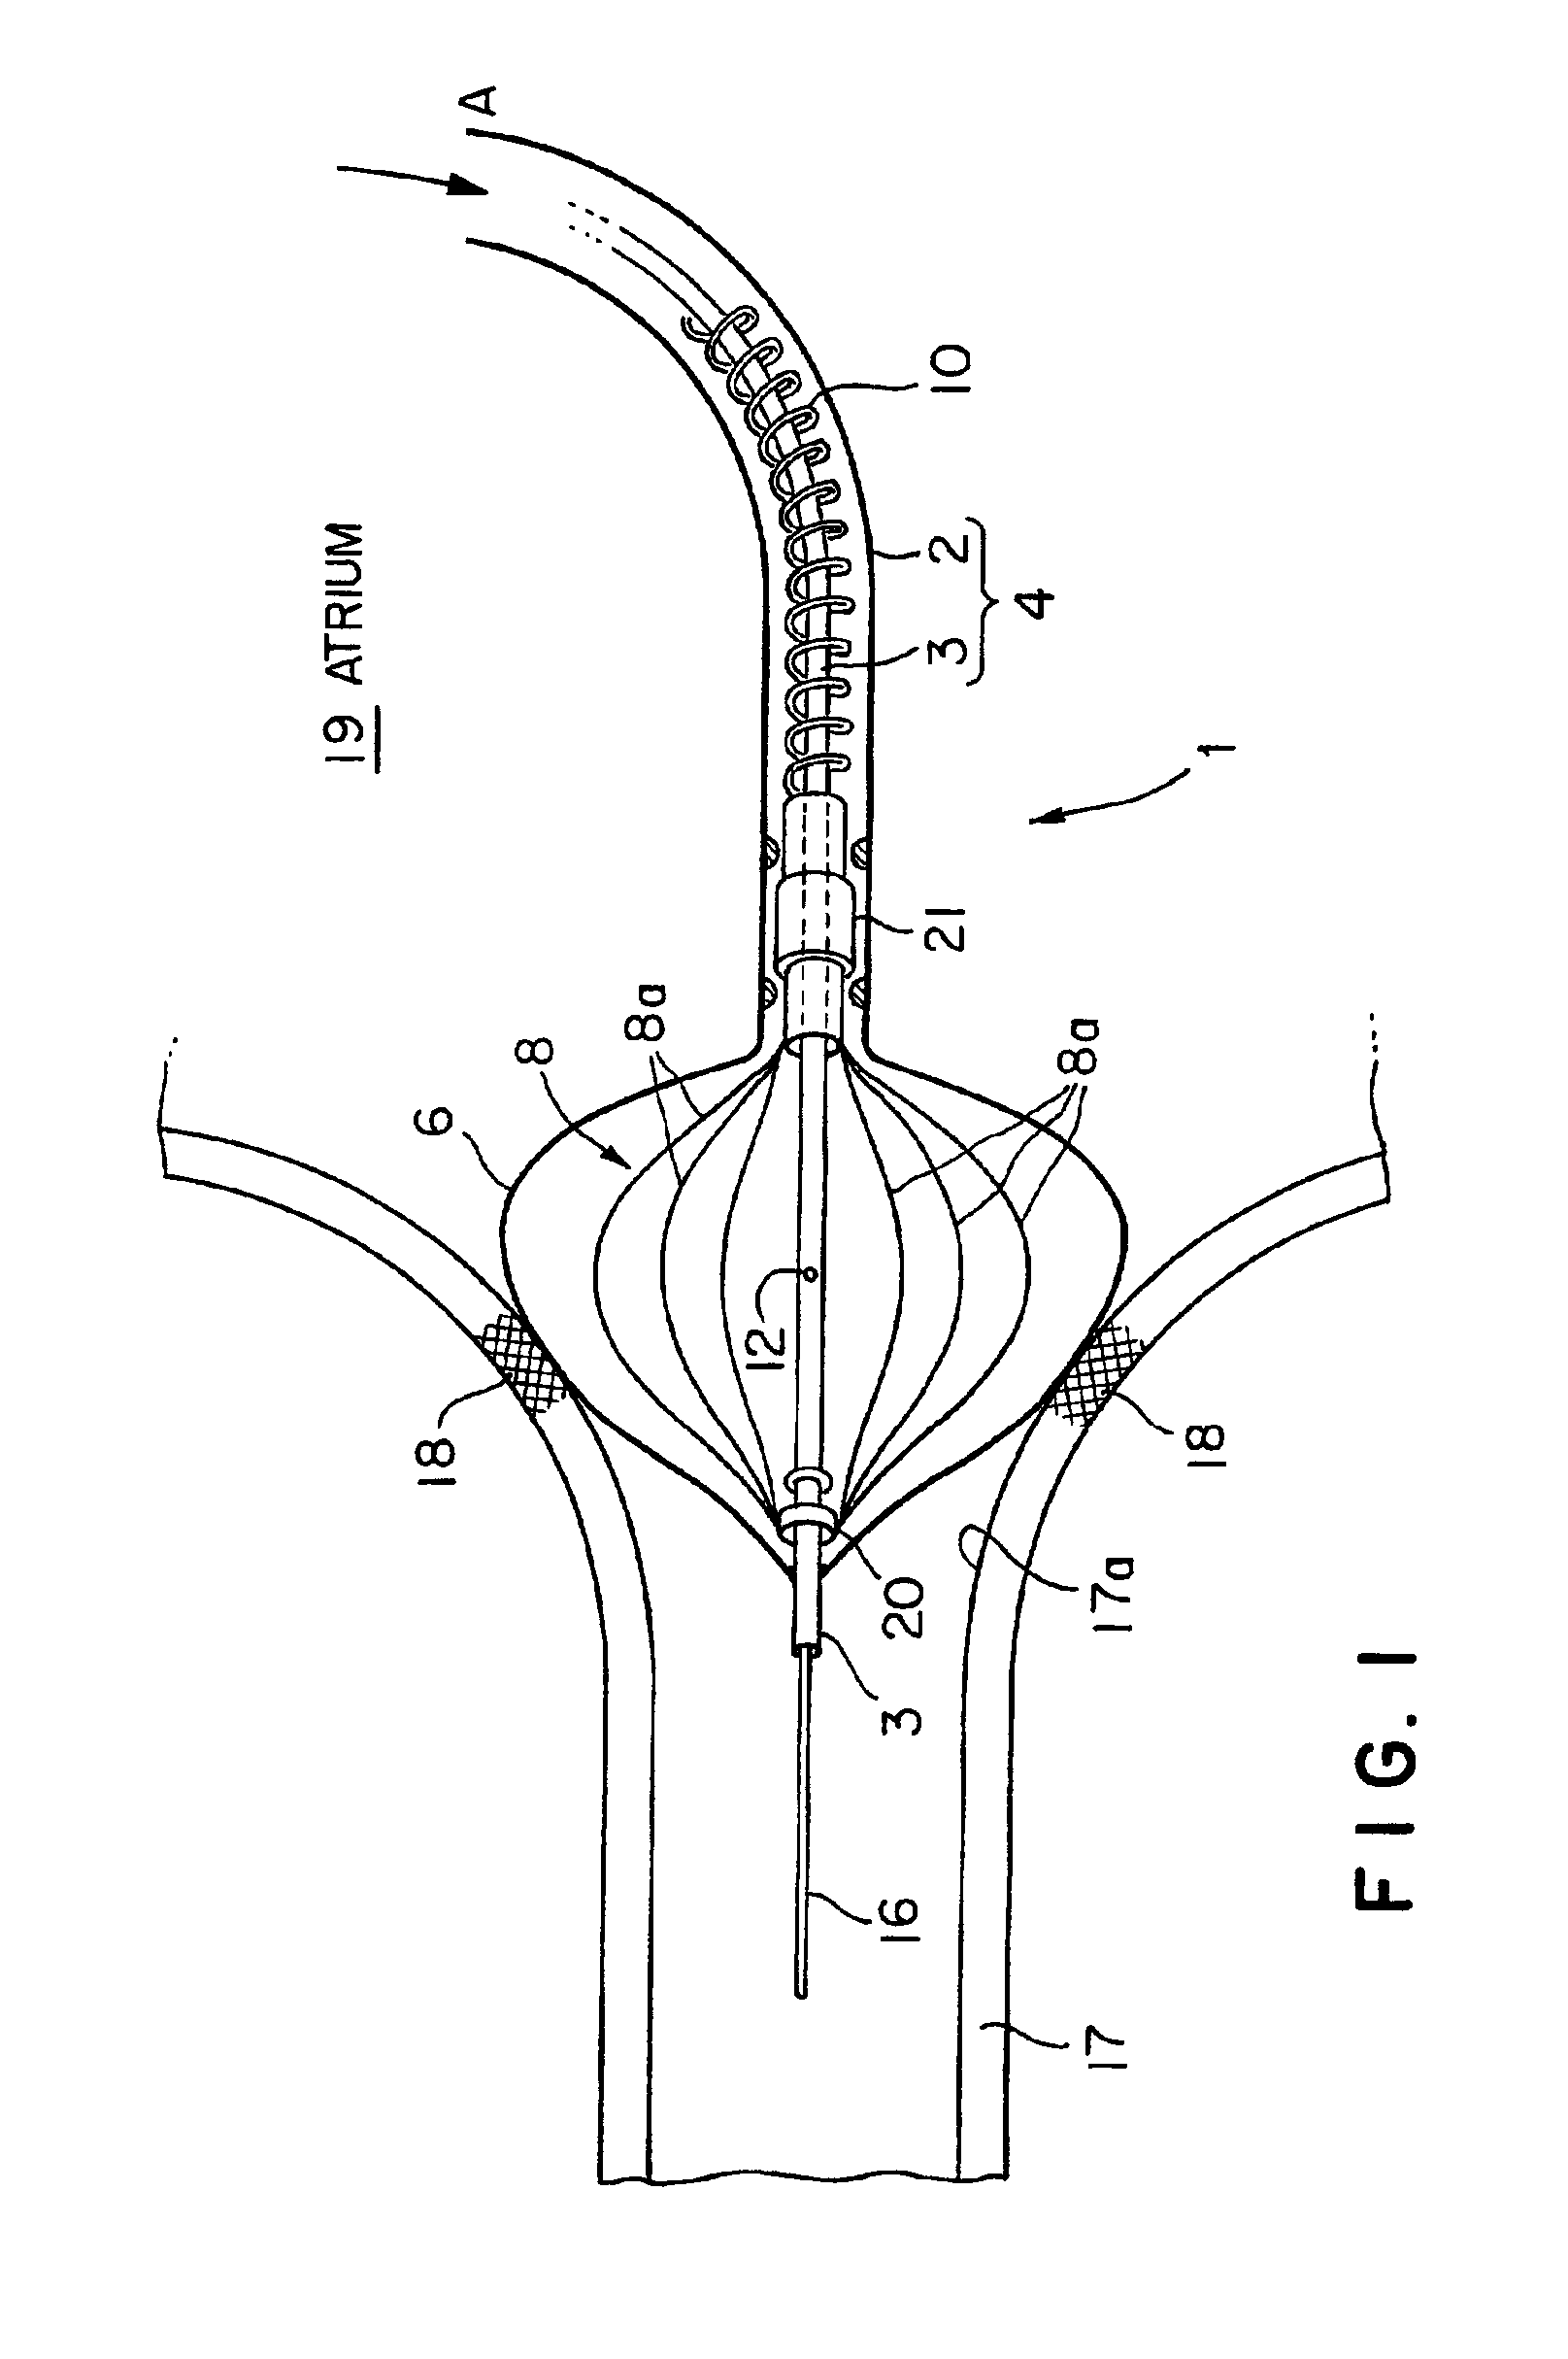 Radiofrequency thermal balloon catheter